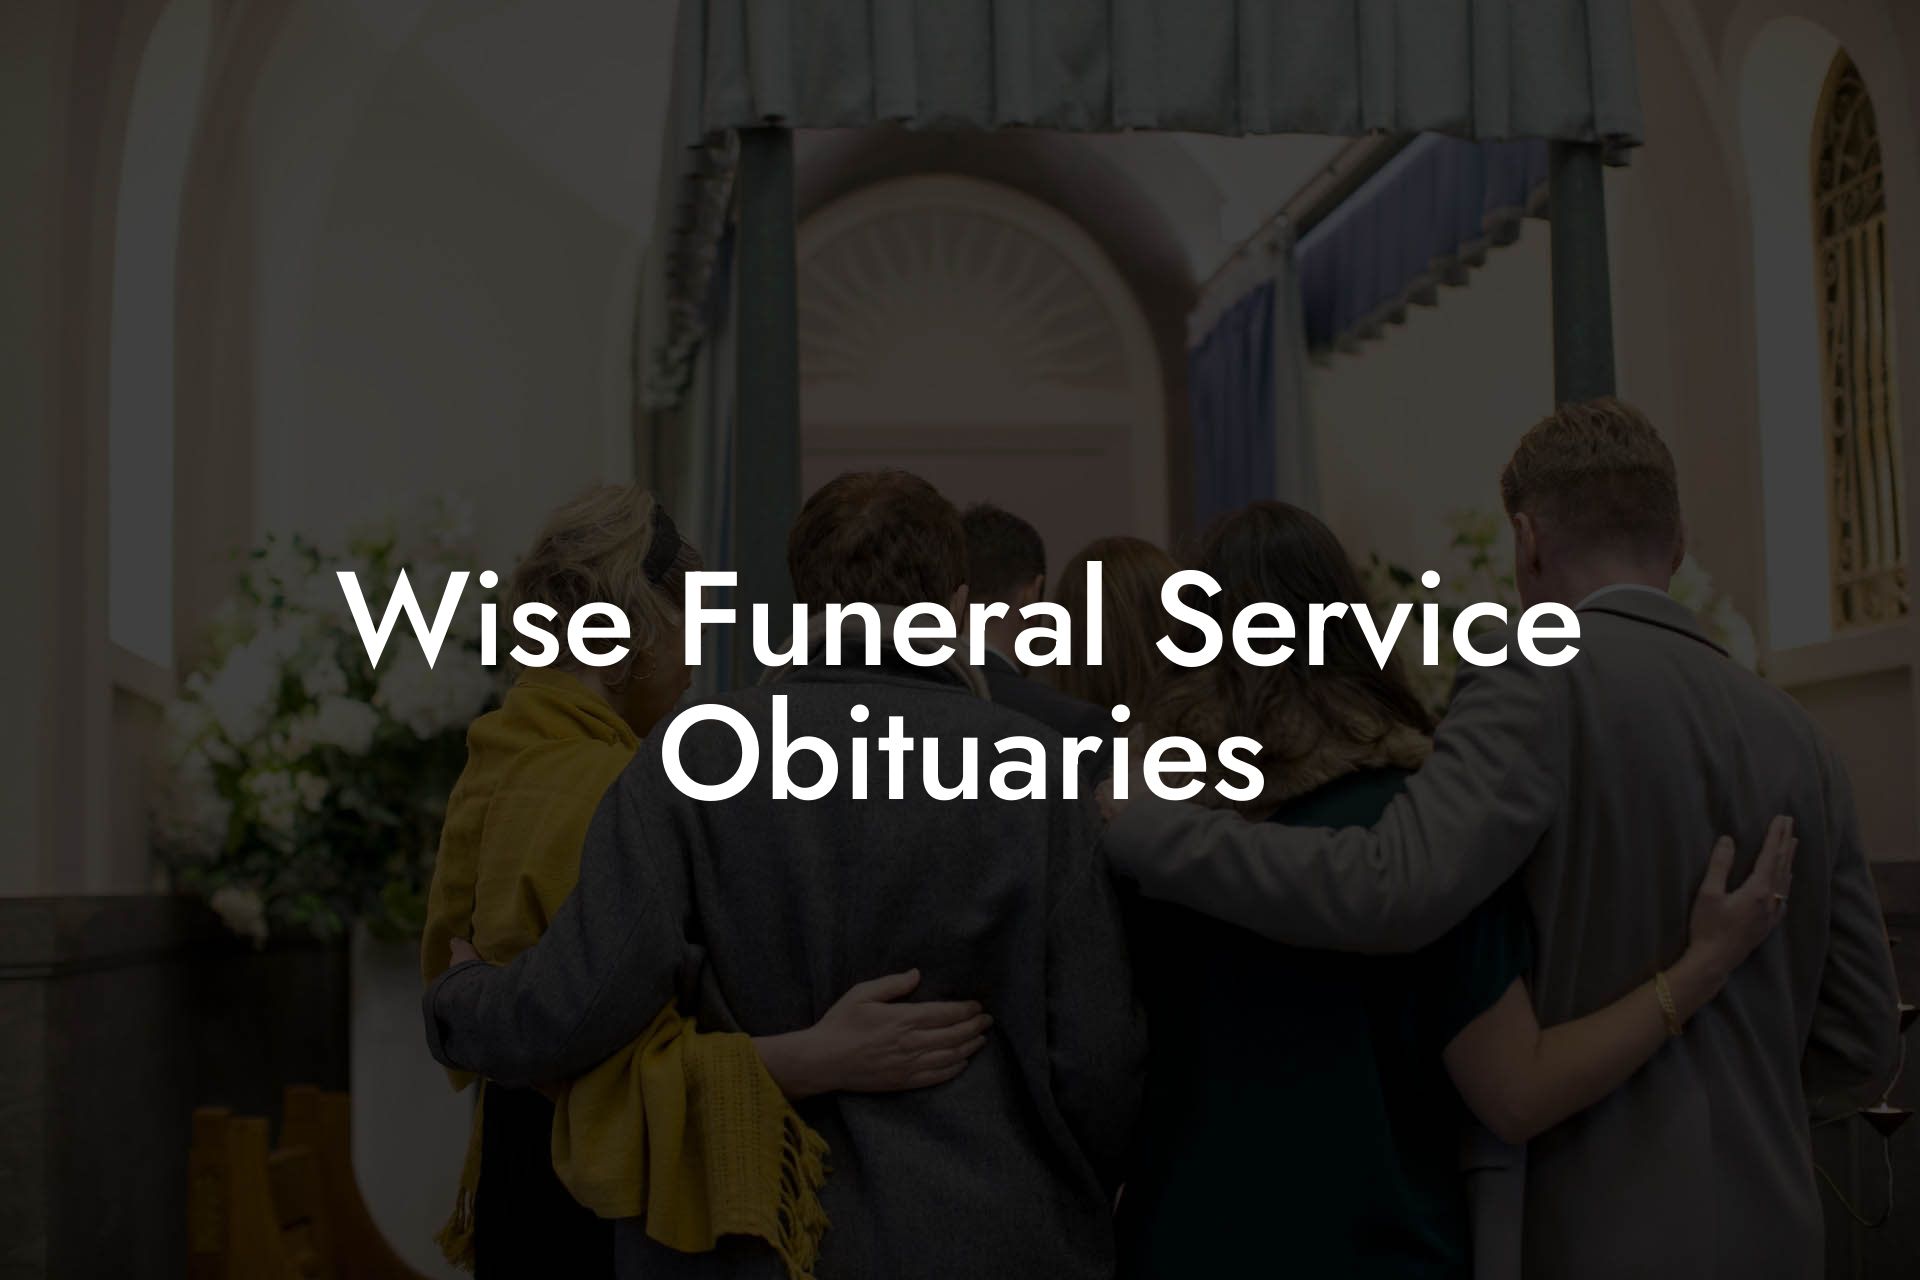 Wise Funeral Service Obituaries